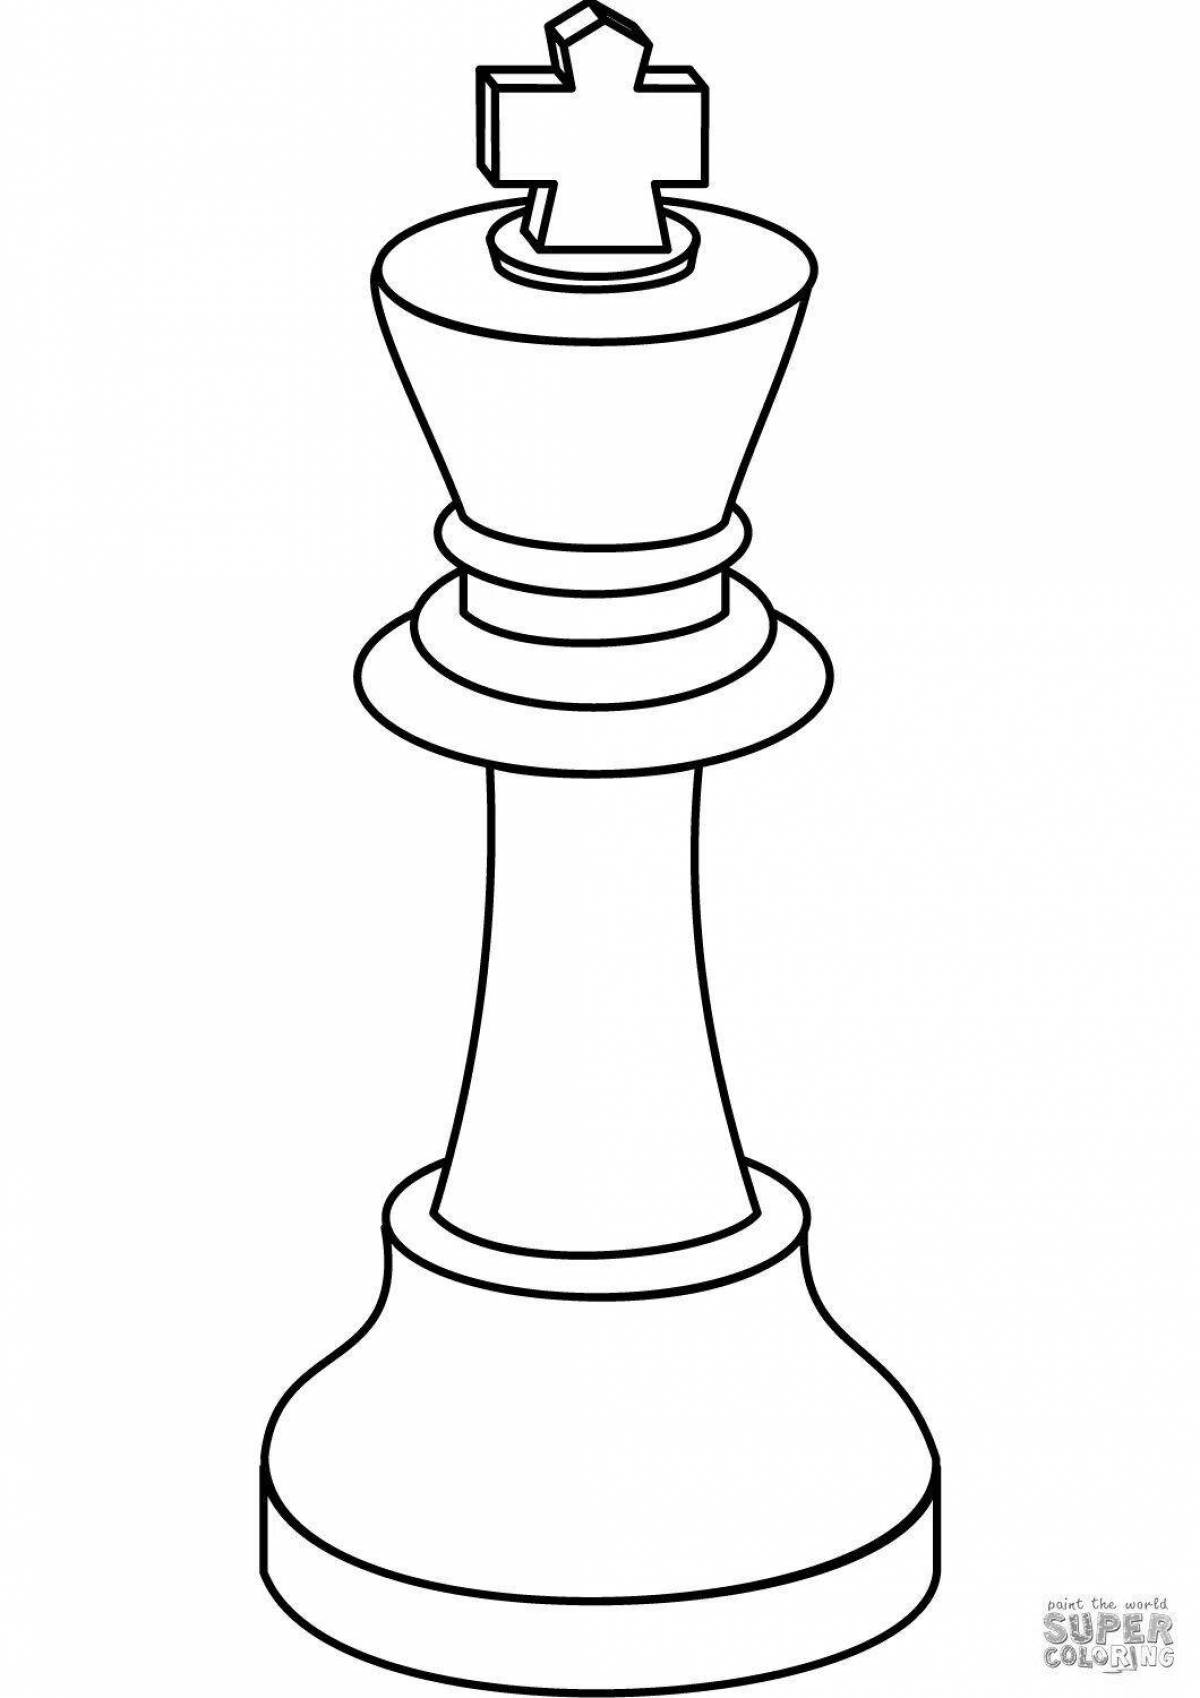 Colorful chess coloring book for beginners